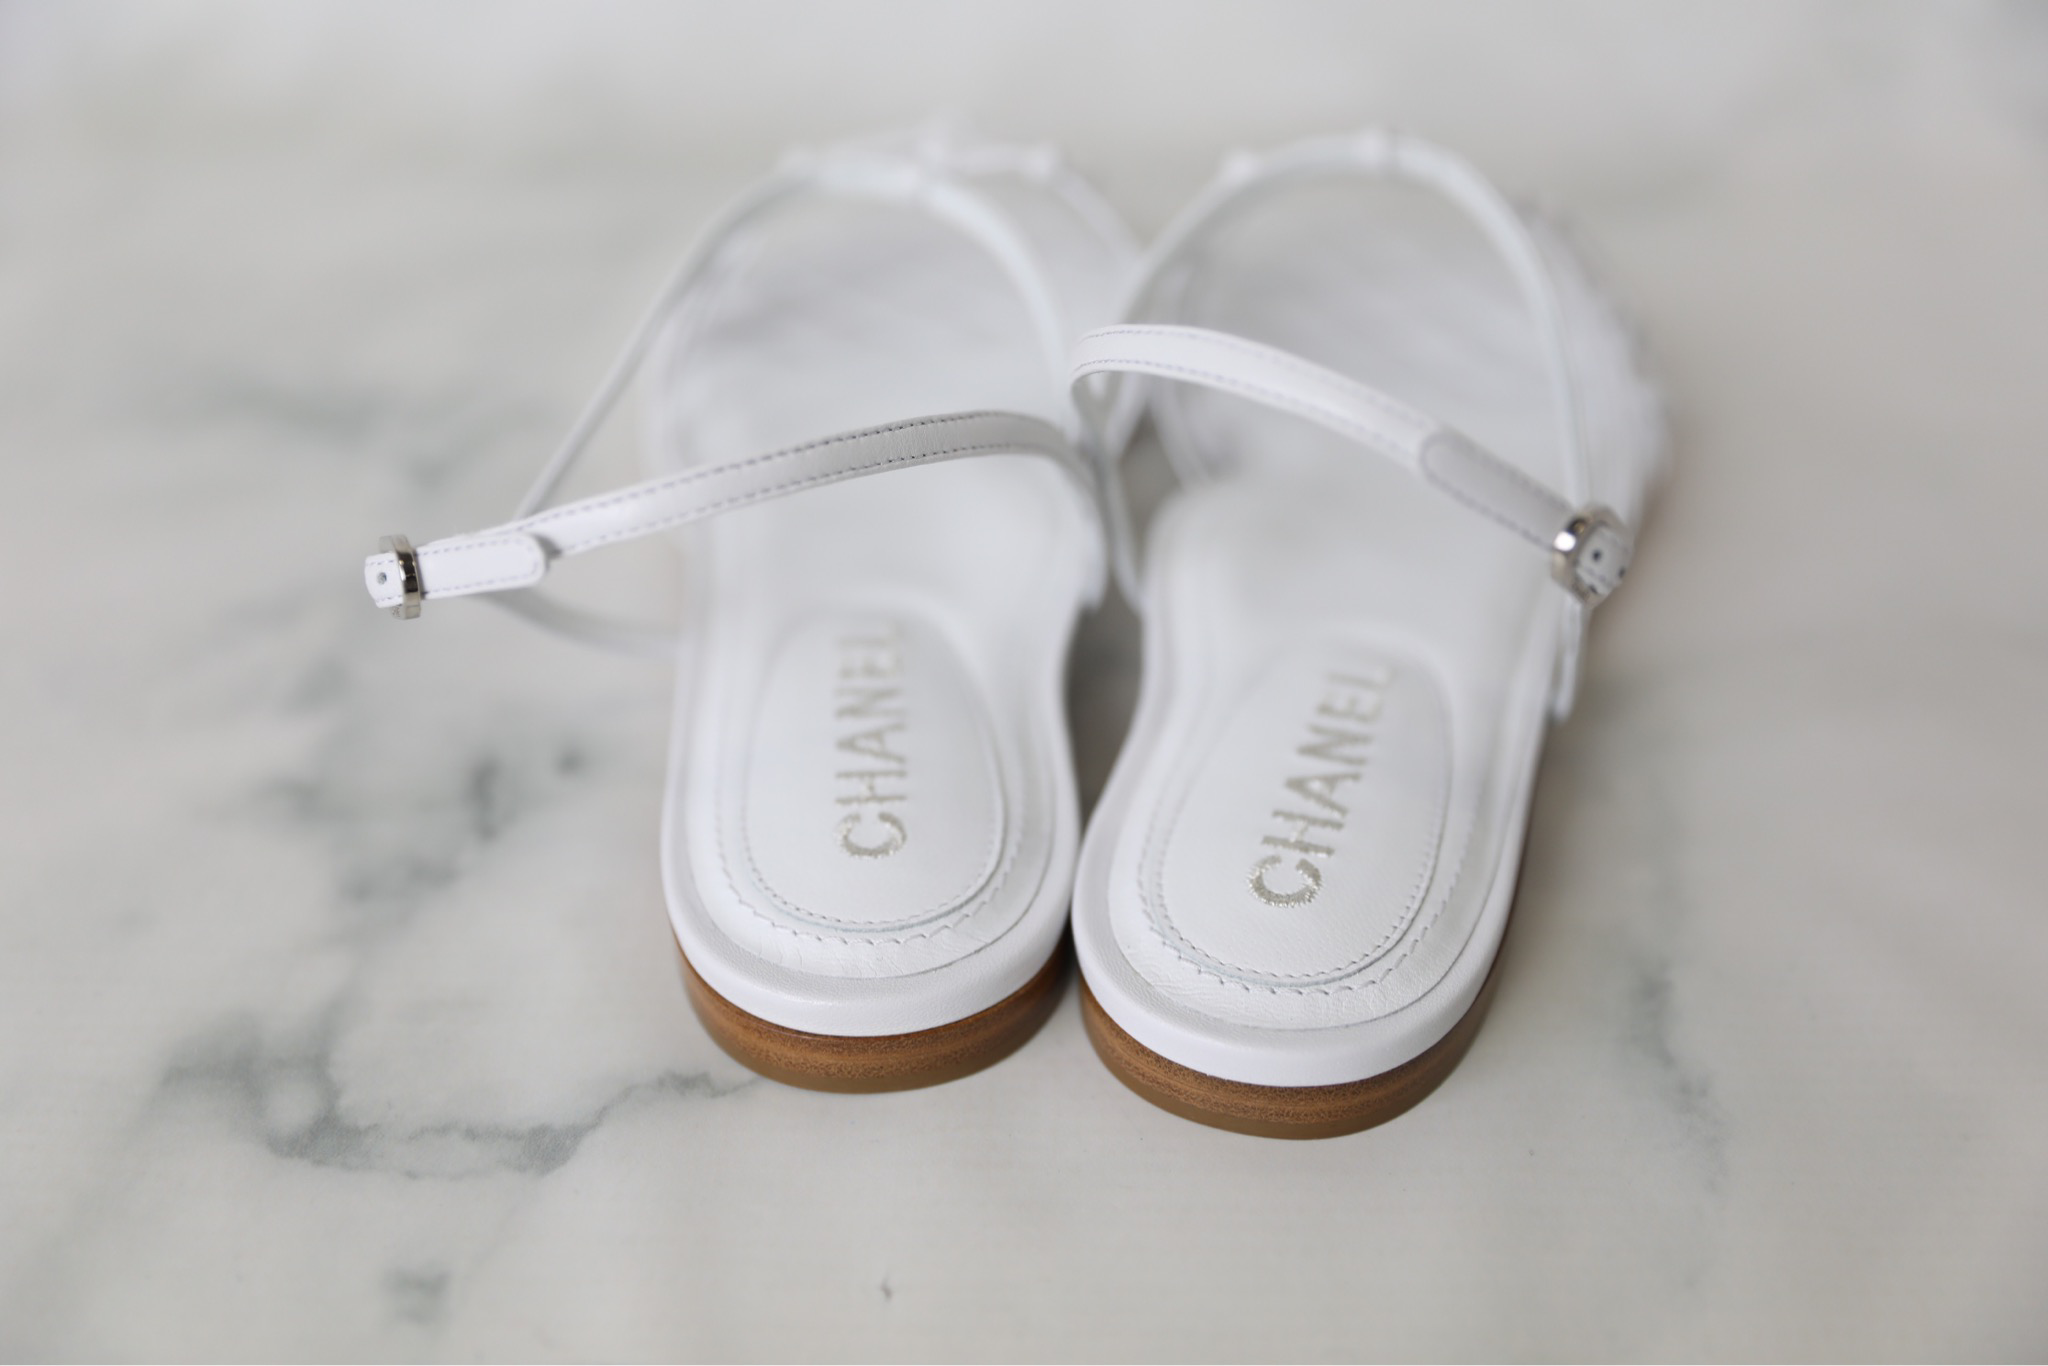 Chanel Shoes Flap Sandals, White Woven Leather, Size 41, New in Box WA001